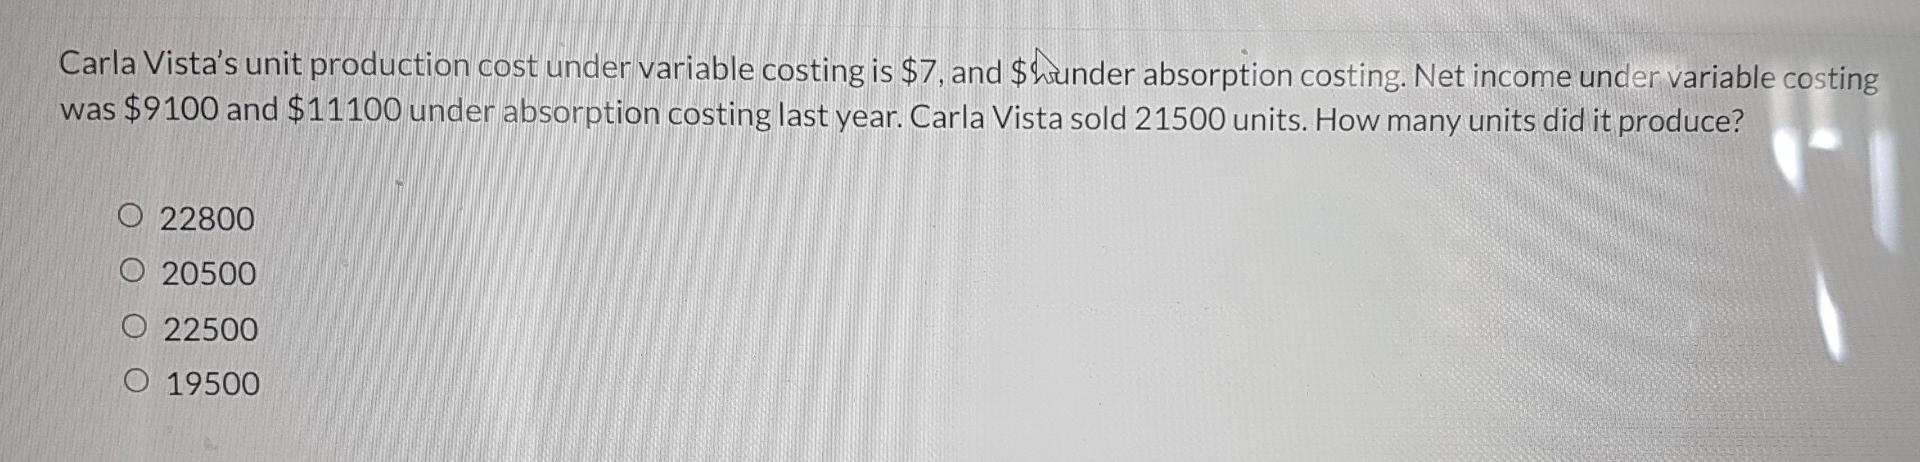 Carla Vistas unit production cost under variable costing is $7, and $ hunder absorption costing. Net income under variable c